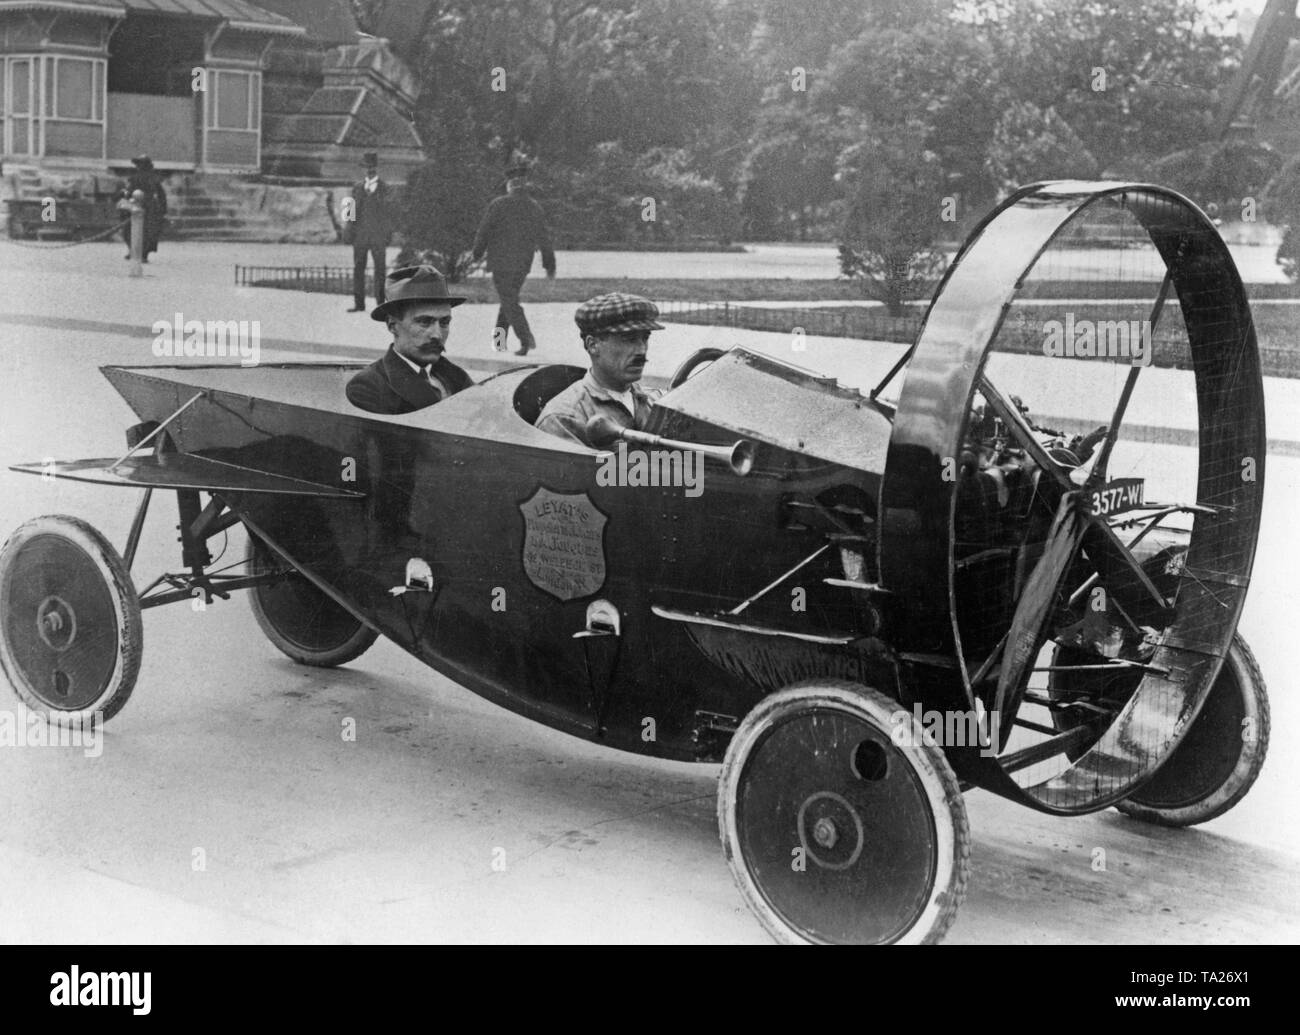 A propeller-driven car of the French brand Helica from the year 1920. An air-cooled two-cylinder engine operated a four-blade propeller at the front of the car. Designer of the propeller car was the French Marcel Leyat. Stock Photo